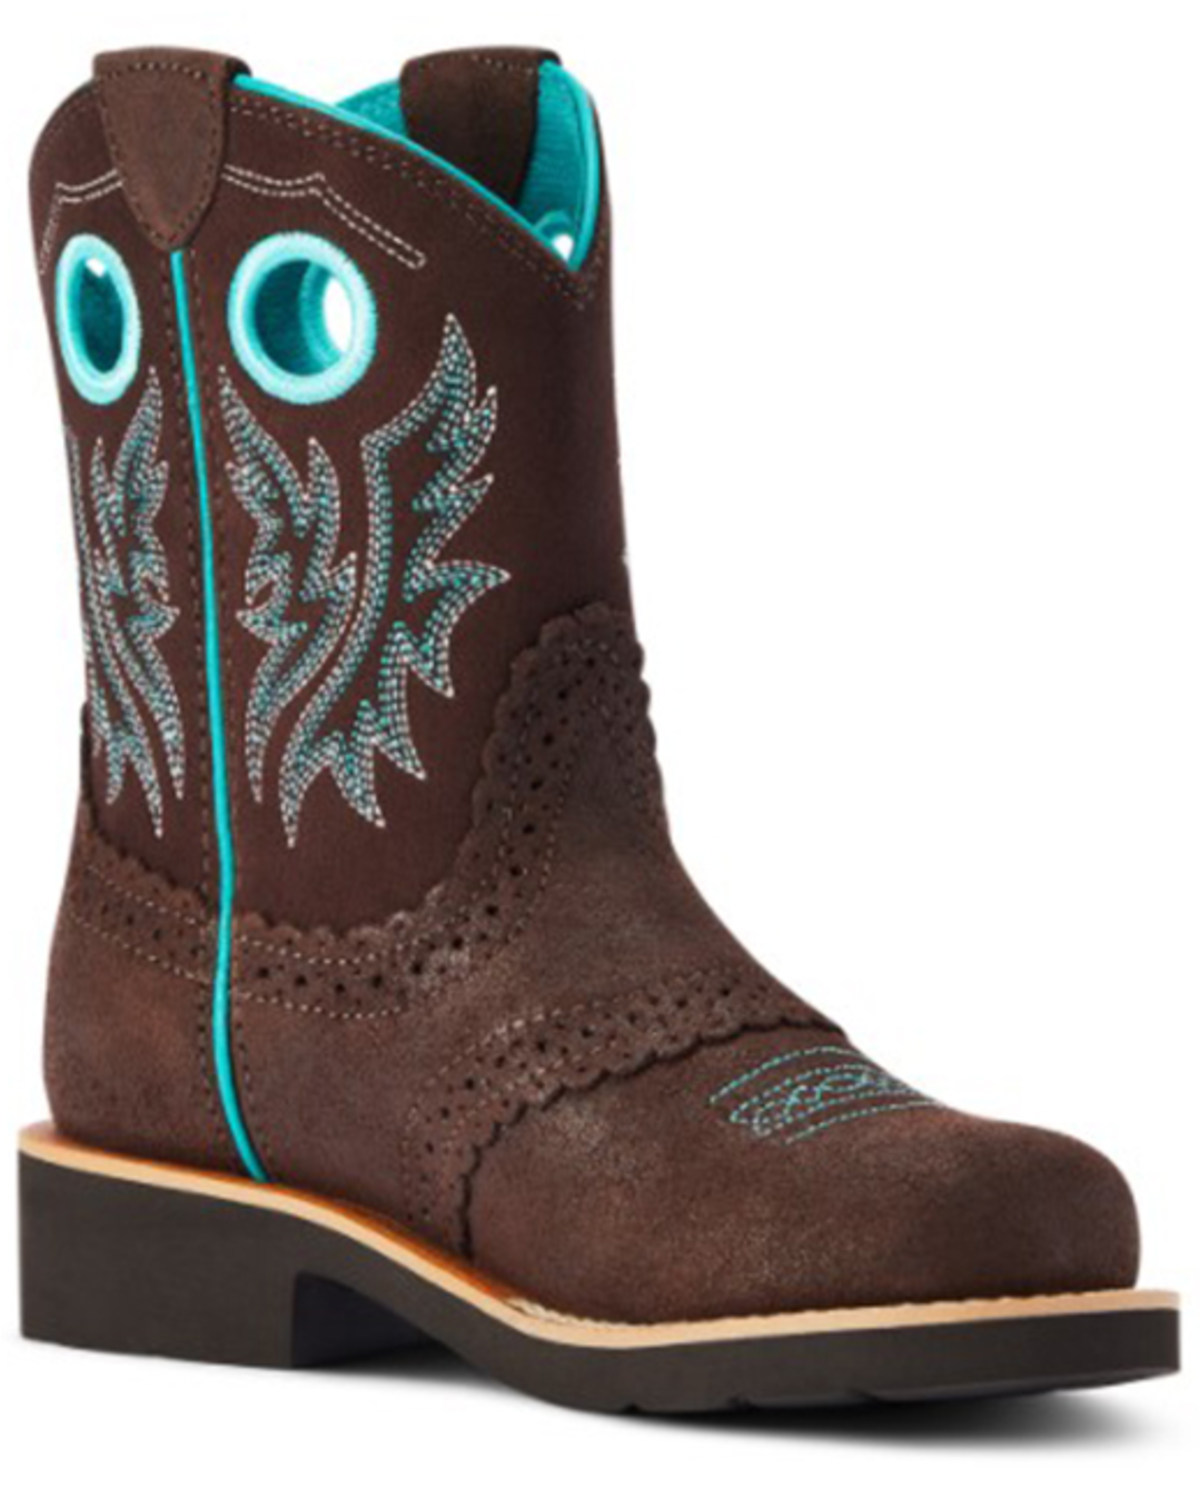 Ariat Youth Girls' Fatbaby Western Boots - Round Toe